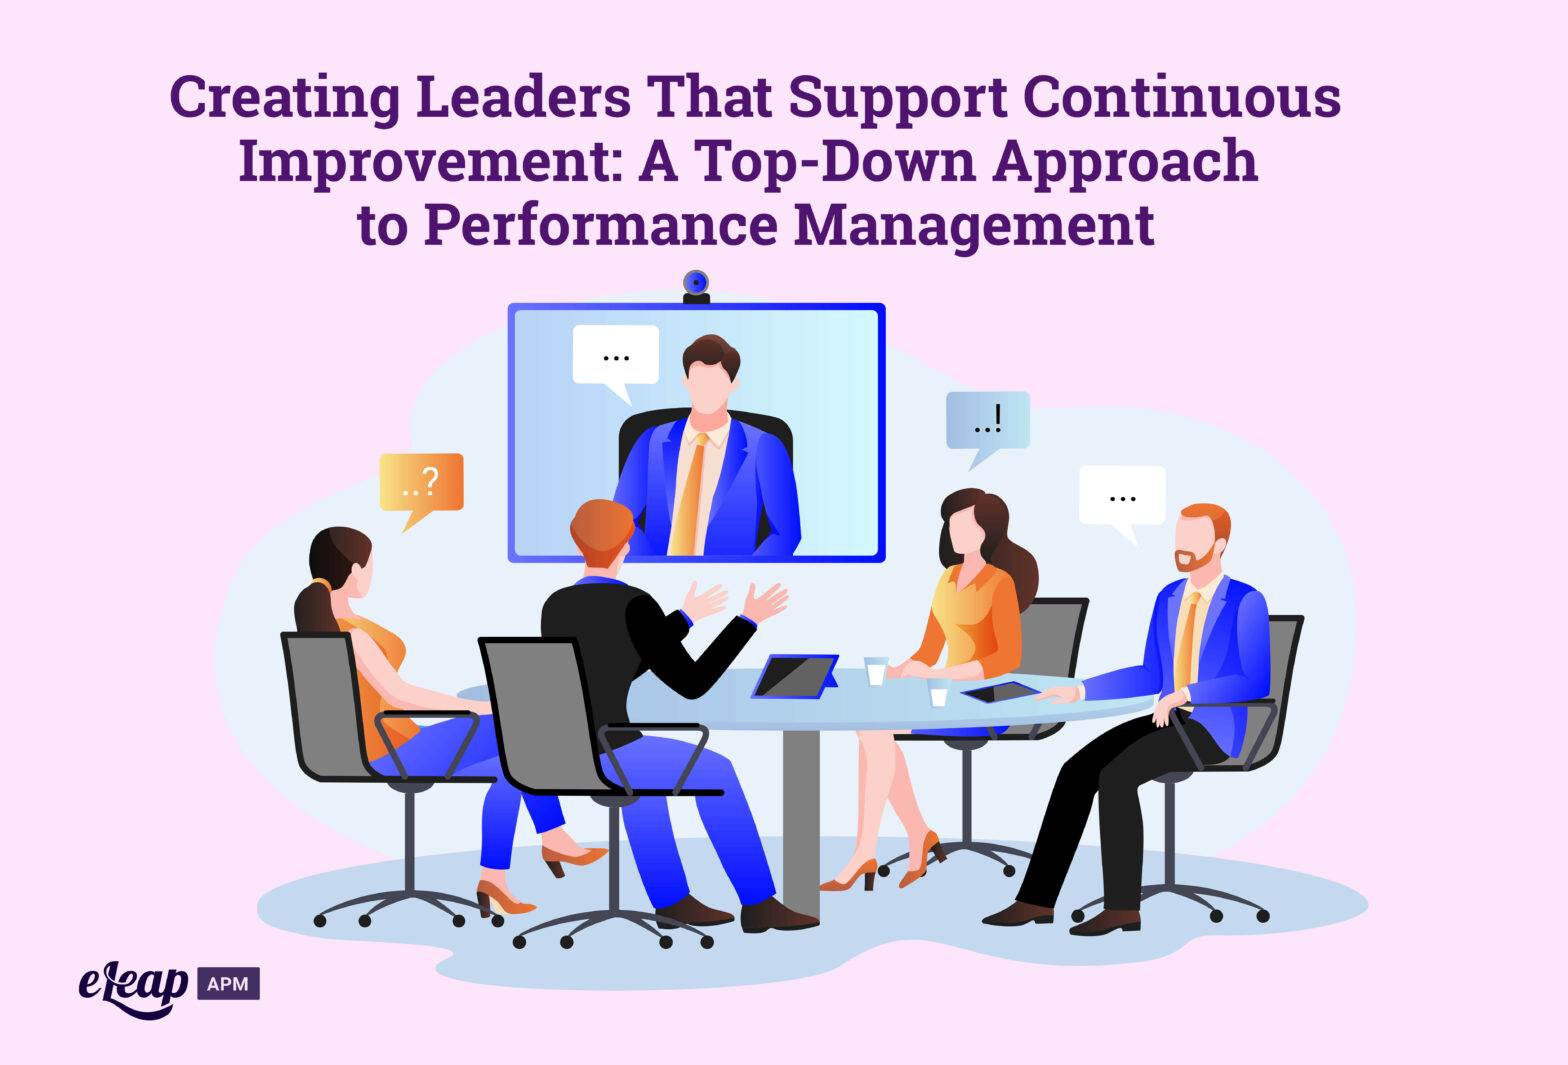 Creating Leaders That Support Continuous Improvement: A Top-Down Approach to Performance Management